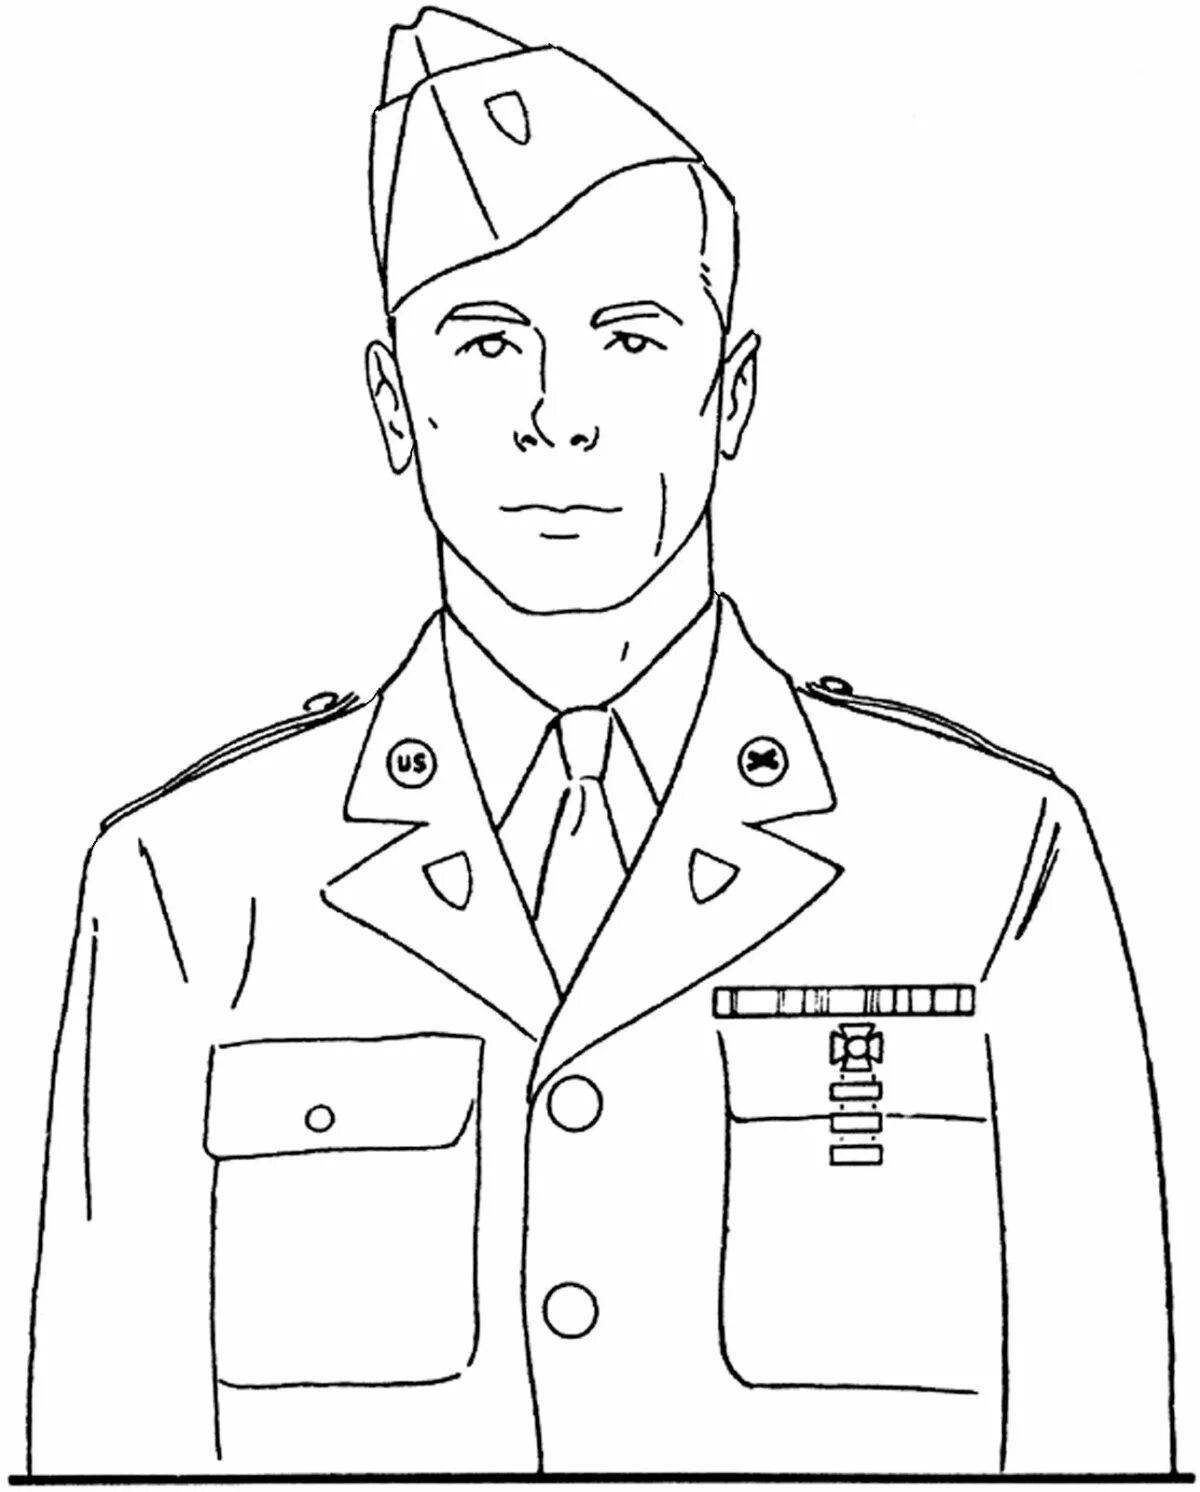 Coloring page playful officer